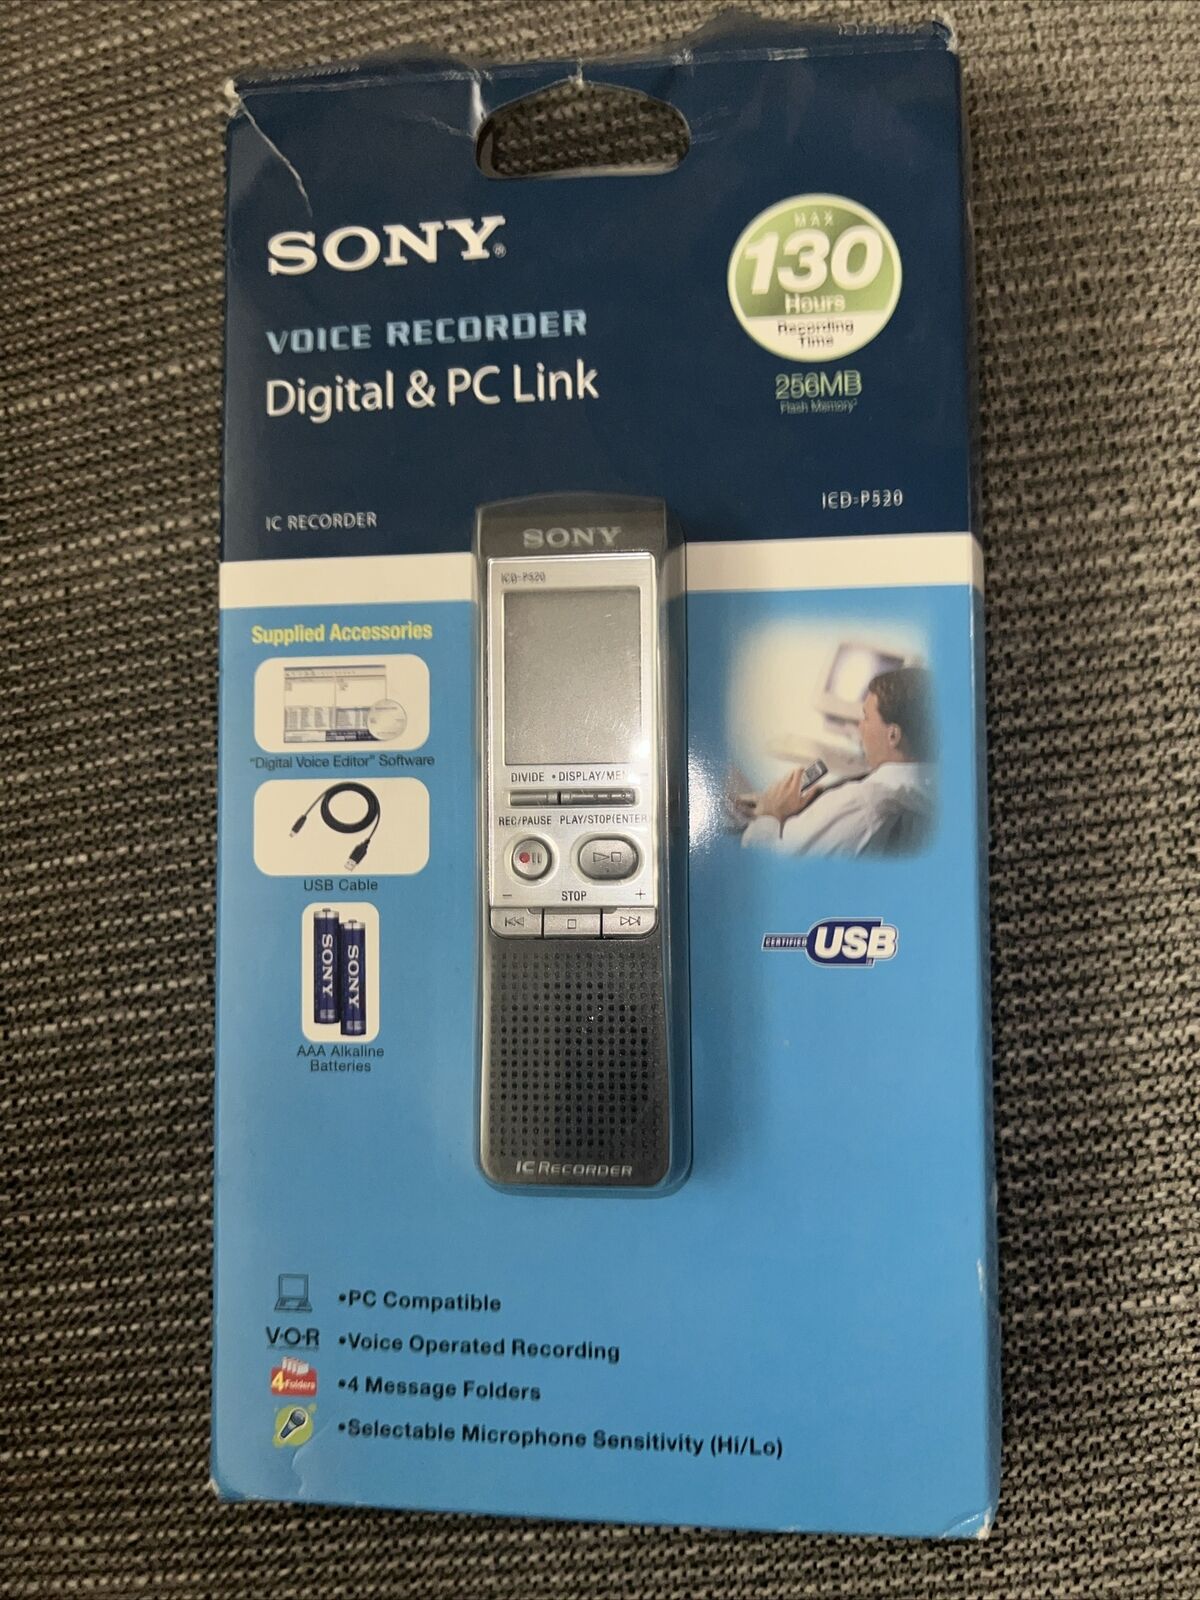 Sony ICD-P520 Digital Voice Recorder with 256 MB Built-in Flash Memory 130 Hours